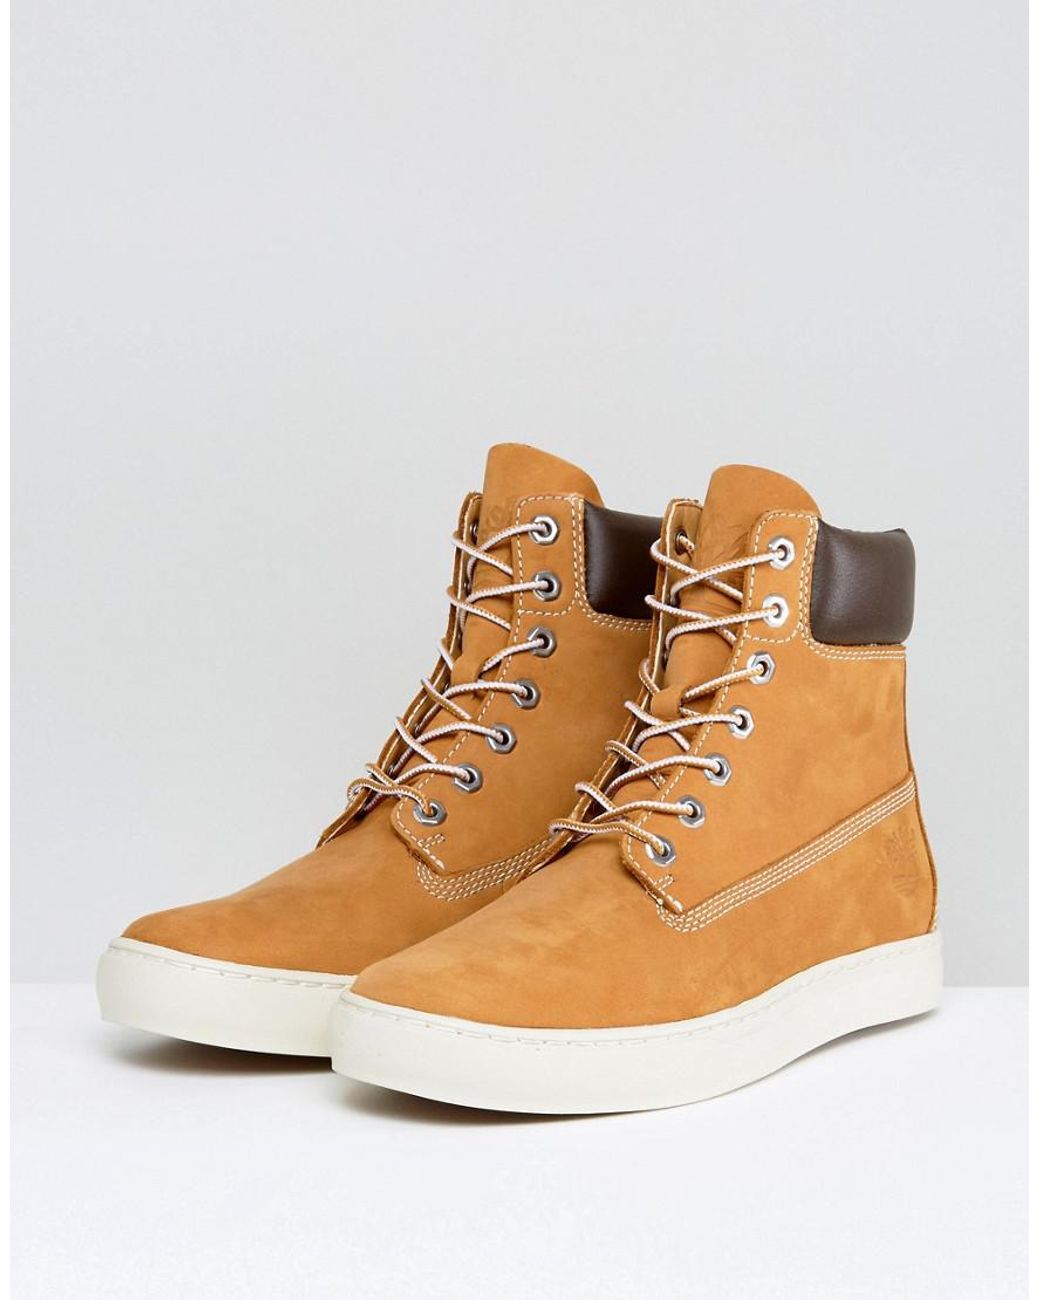 Timberland Newmarket 6 Inch Boot Cheapest Prices, Save 57% | jlcatj.gob.mx